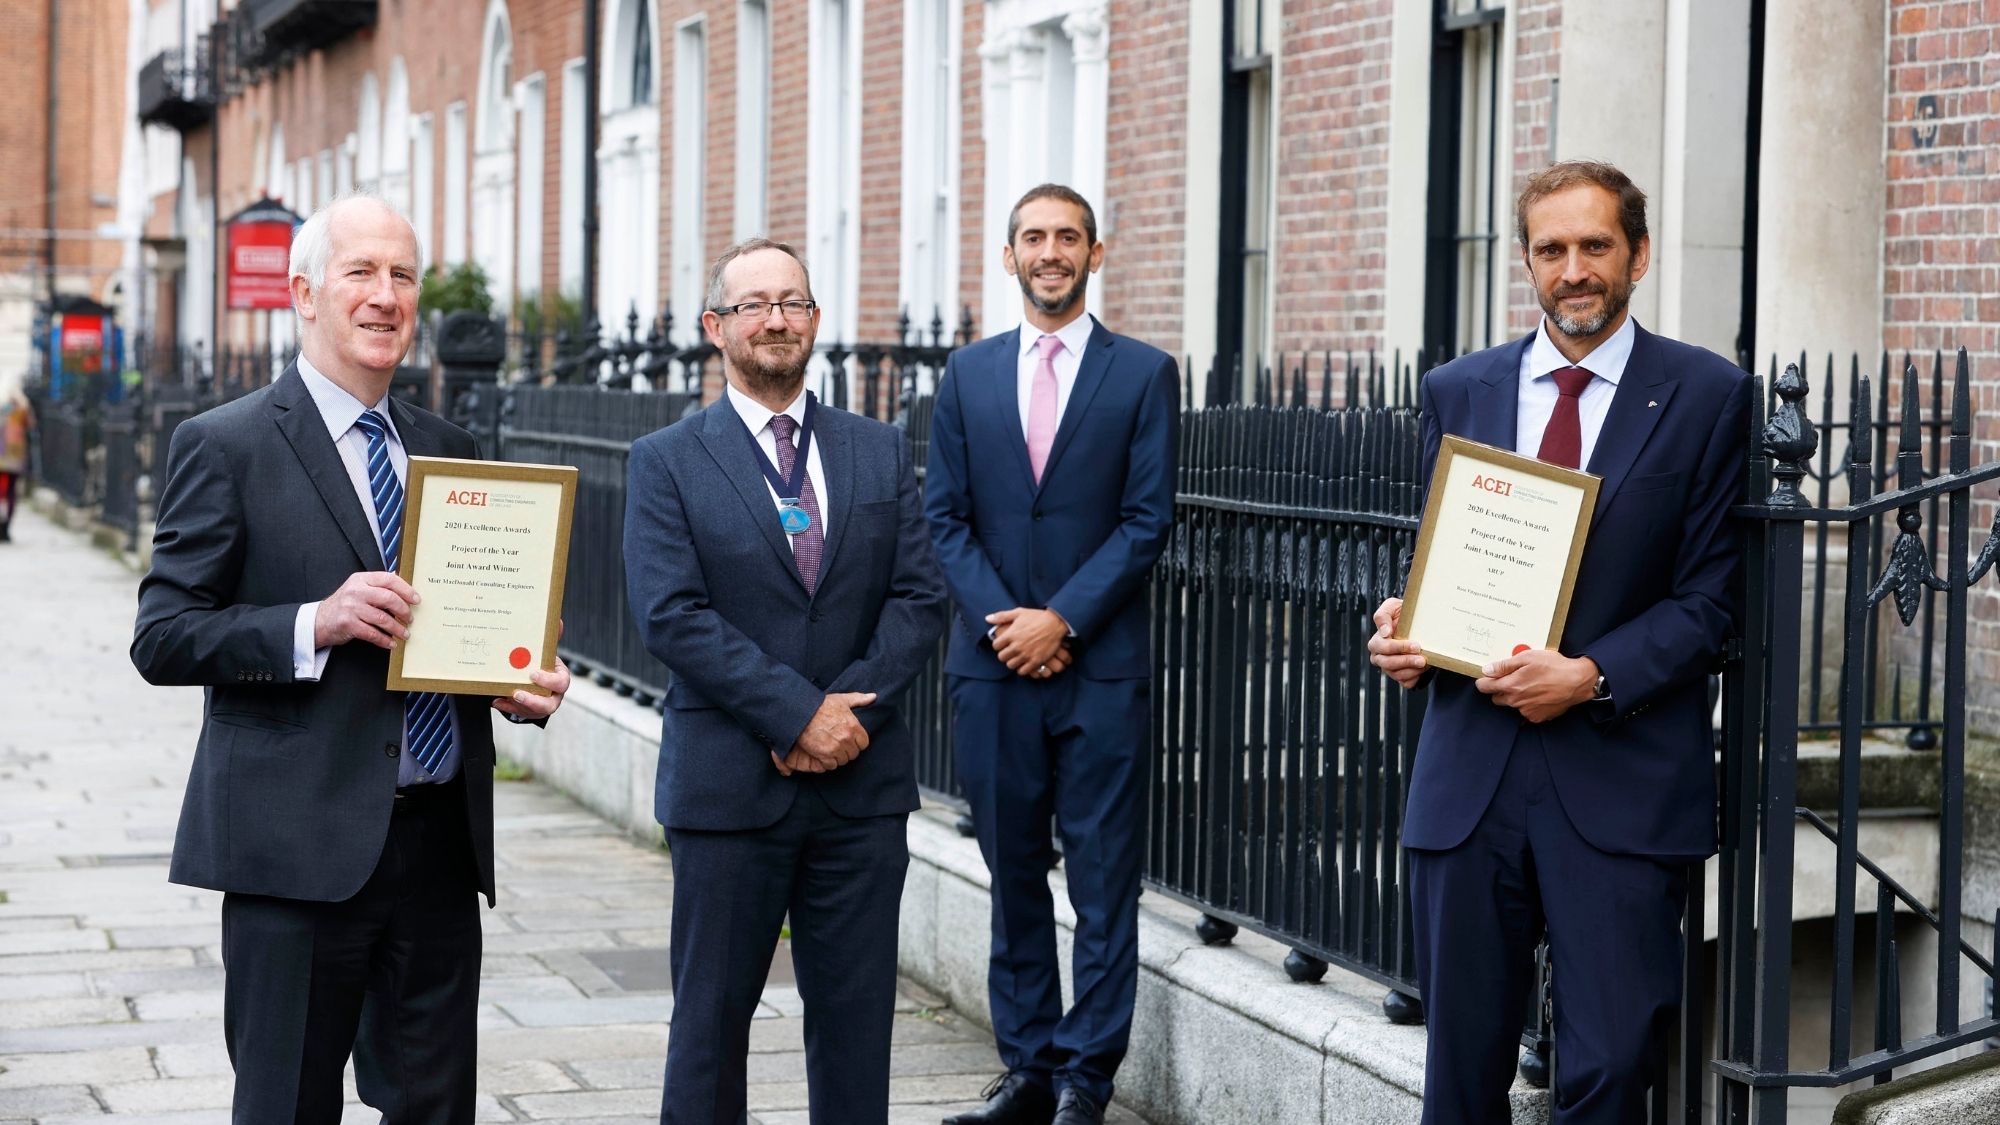 Representatives from Mott MacDonald, ACEI and Arup at the award presentation for the Project of the Year 2020 for the Rose Fitzgerald Kennedy Bridge.